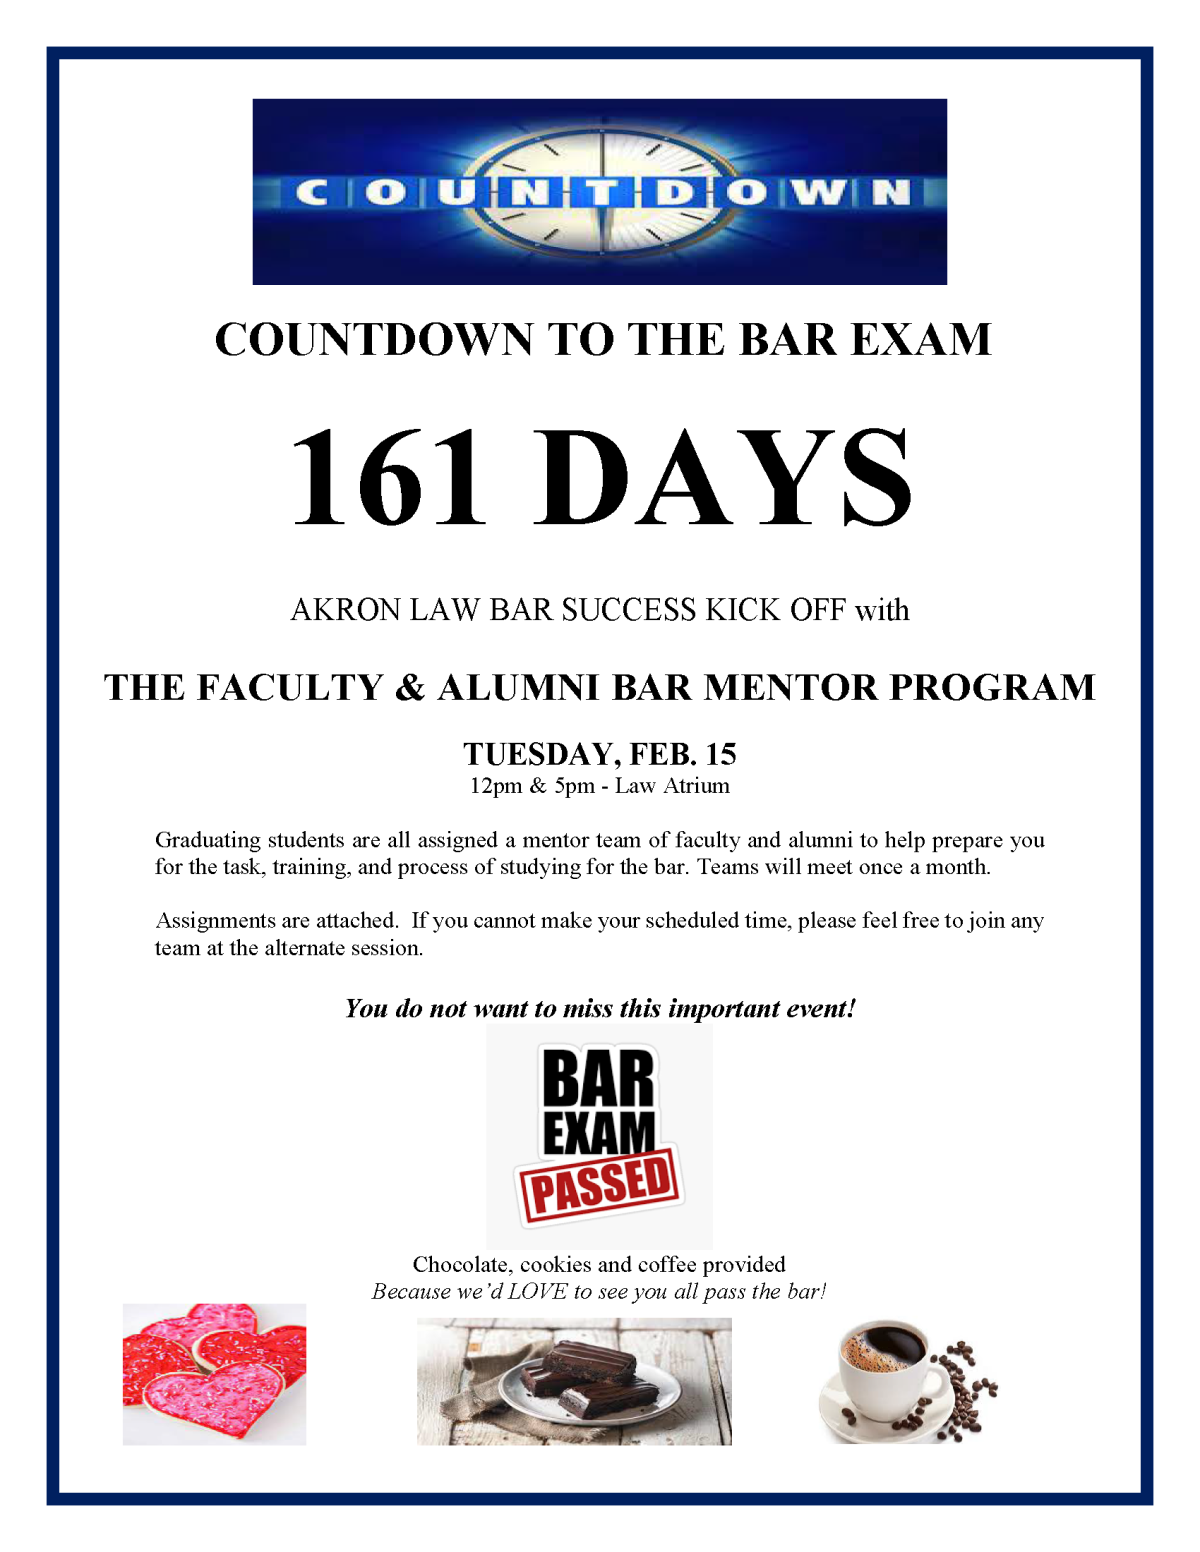 COUNTDOWN TO THE BAR EXAM